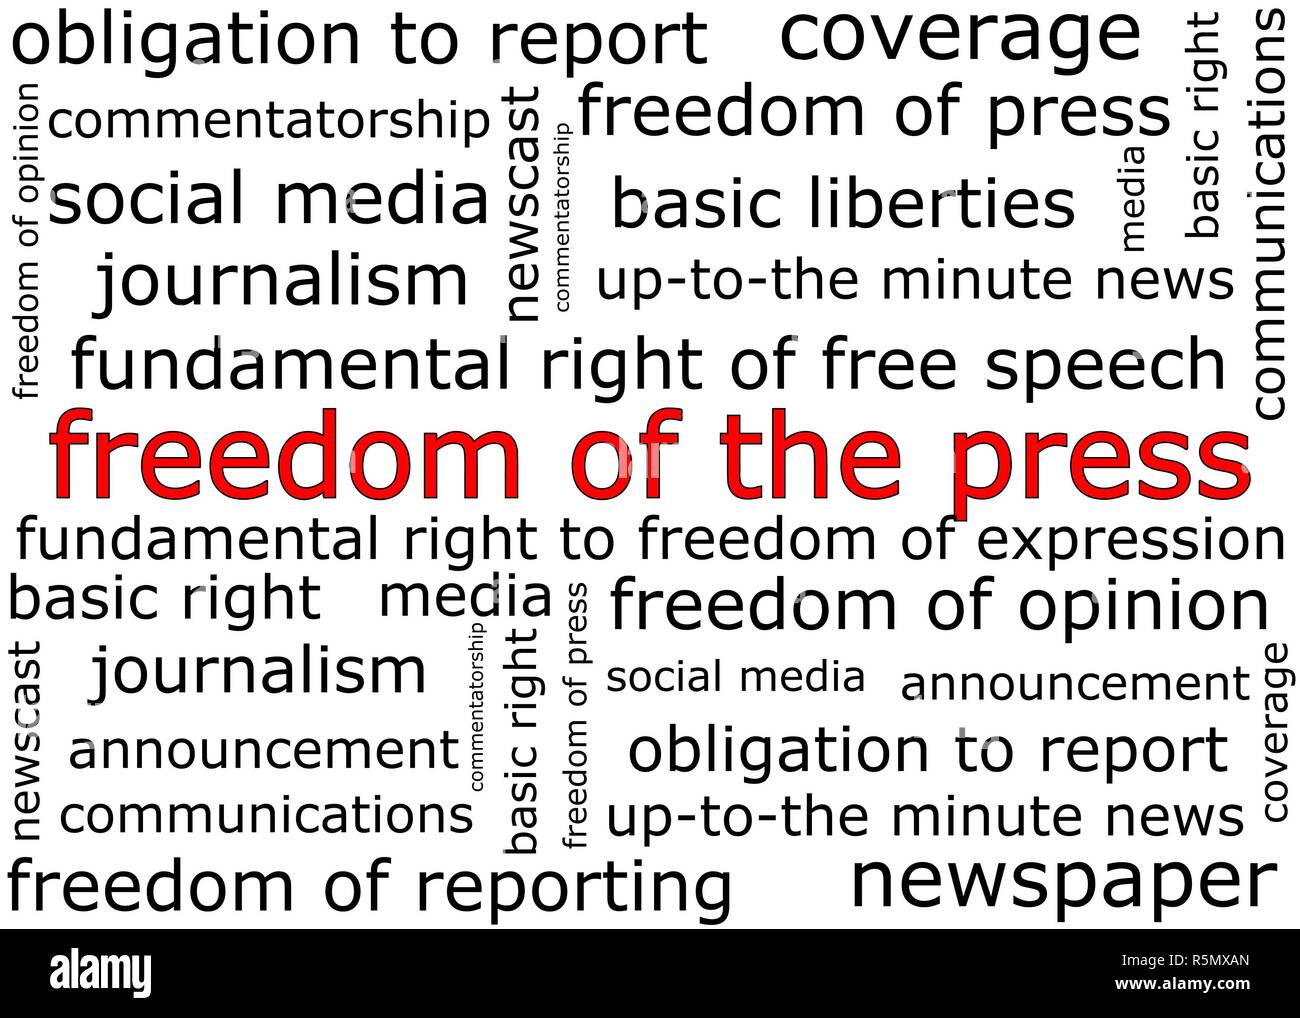 Freedom of the Press wordcloud - illustration Stock Photo